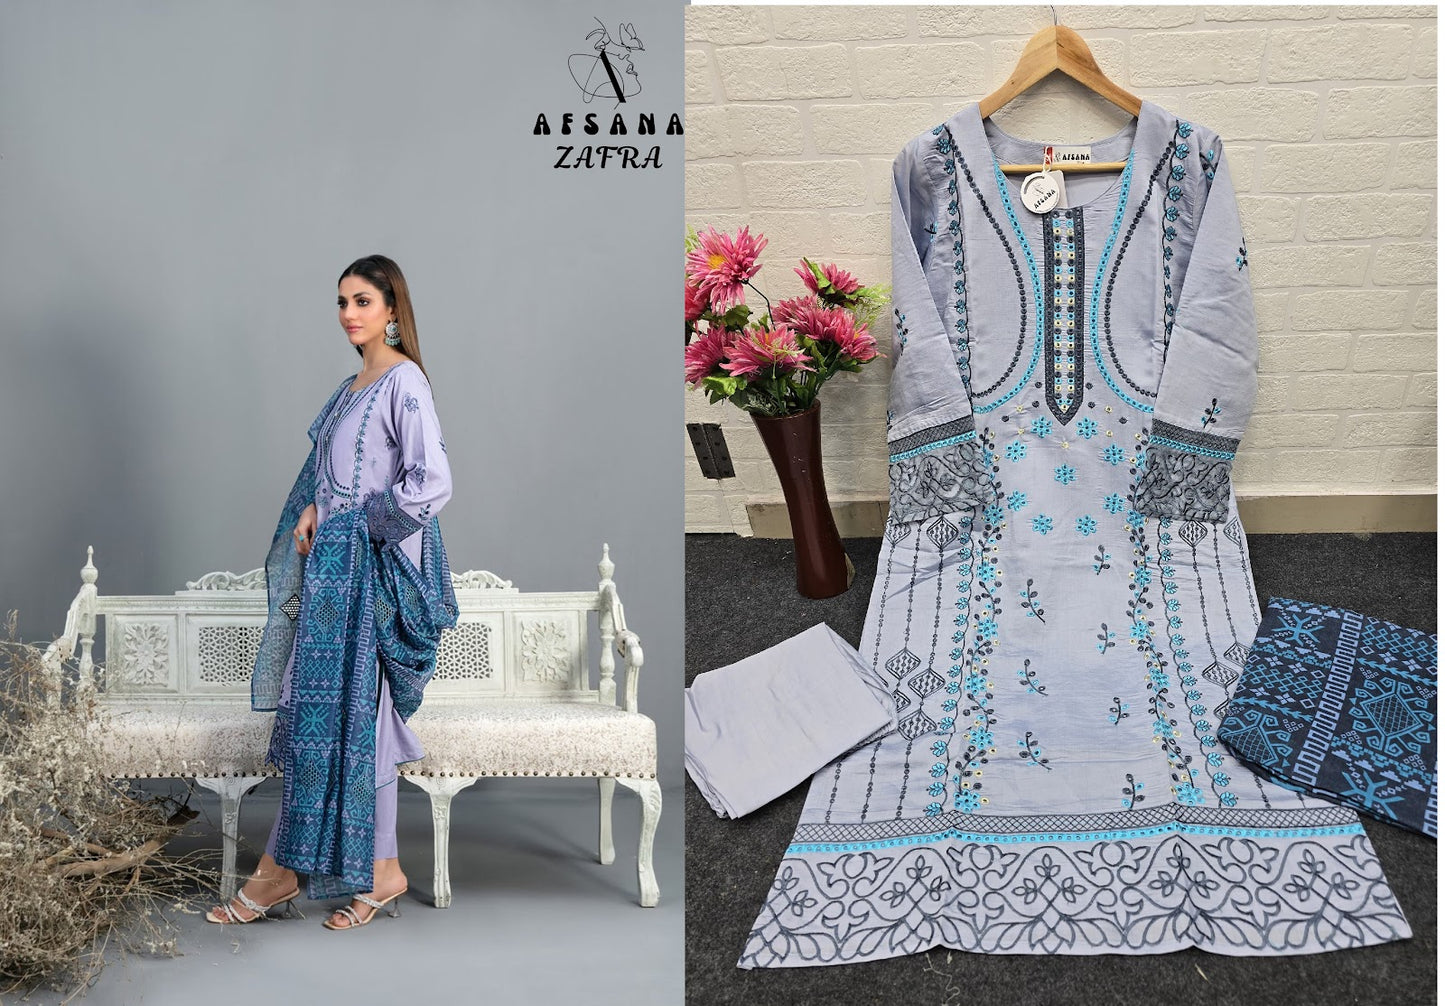 Zafra Afsana Roman Readymade Pant Style Suits